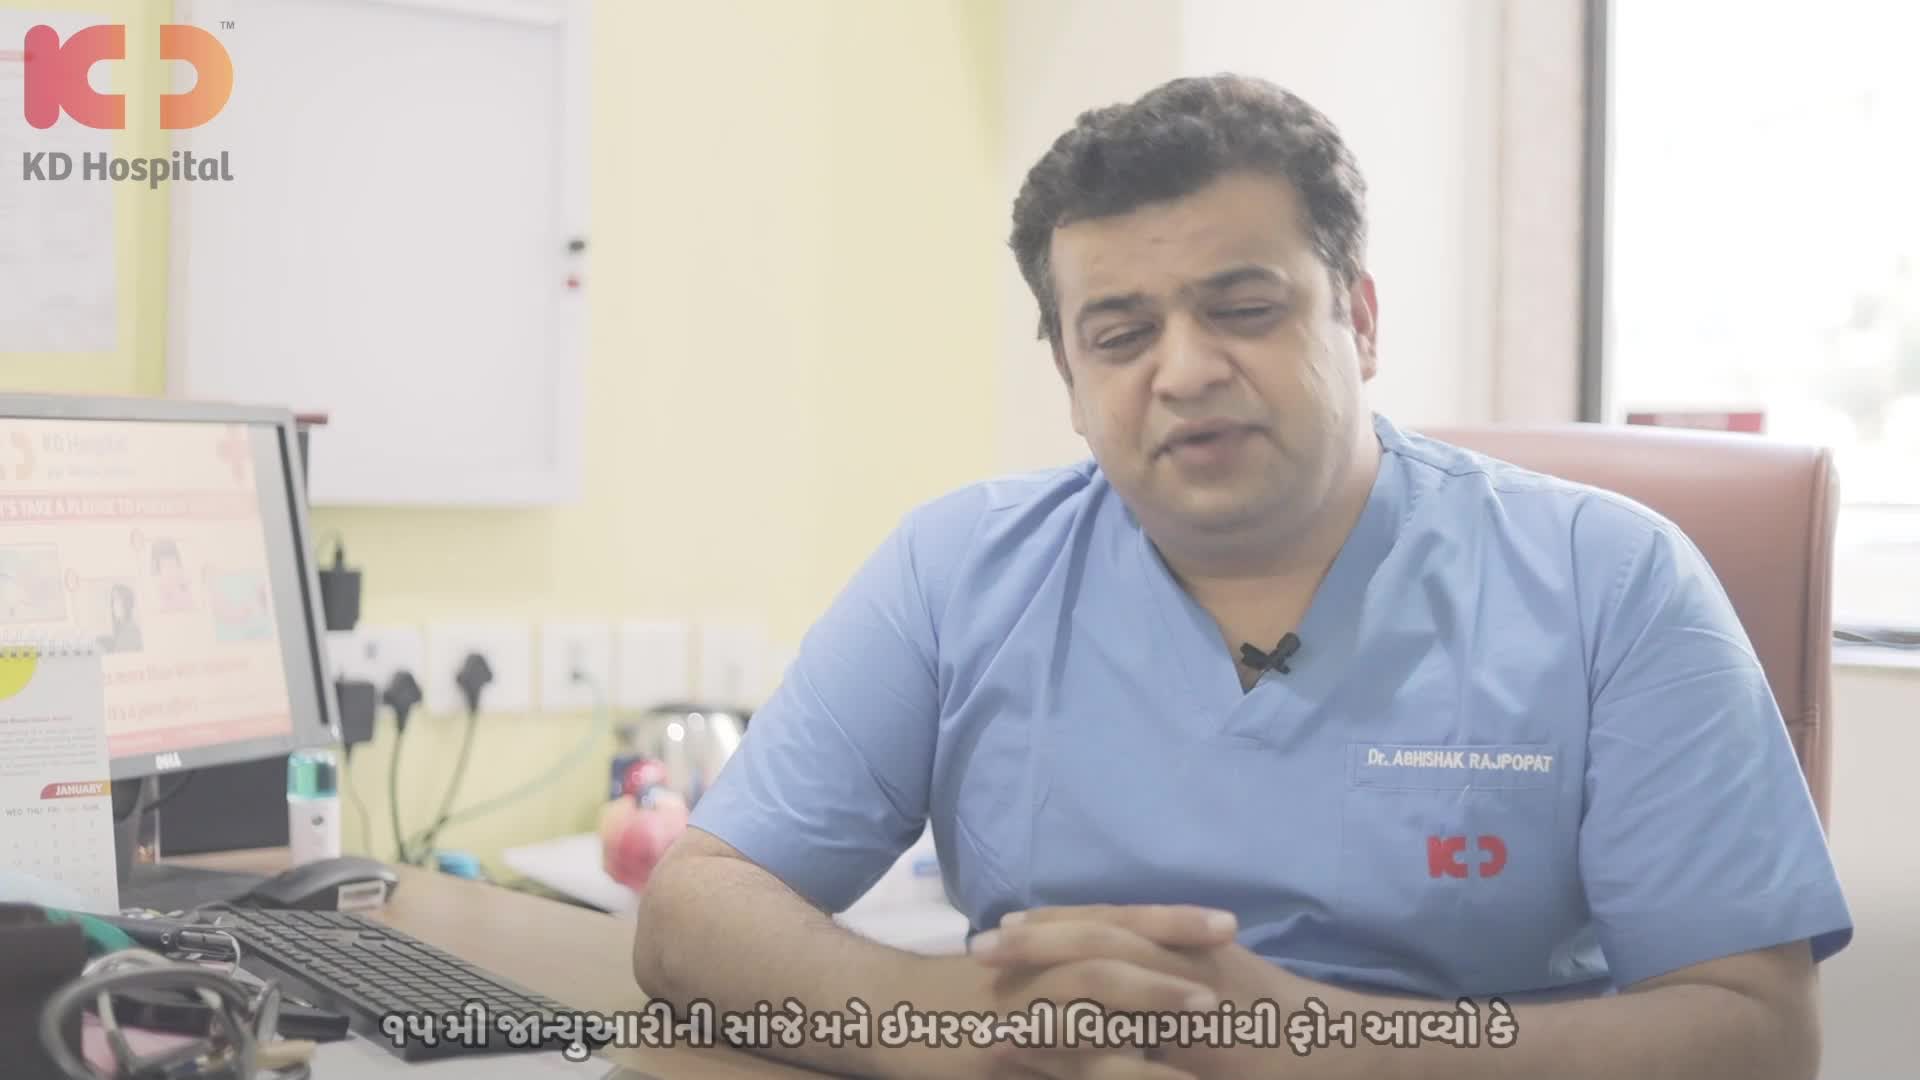 KD Hospital feels a moment of pride for having seen the faith prevailing - when our cardiologist Dr Abhishek Rajpopat could save the life of Mr Vinod when he came to the hospital's emergency department. Hear the whole story of his survival from Mr Vinod himself. To know the full details, please visit https://youtu.be/gS6QShd6CVM

#KDHospital #Compassion #ER #EmergencyMedicine #CardiacArrest #AcuteMI #Cardiologist #CardiacCare #Diagnosis #Therapeutics #patienttestimonial #patient #testimonial #testimony #Awareness #wellness #goodhealth #wellnessthatworks #Nusring #NABHHospital #QualityCare #hospitals #doctors #healthcare #medical #health #physicians #surgery #surgeon #Ahmedabad #Gujarat #India